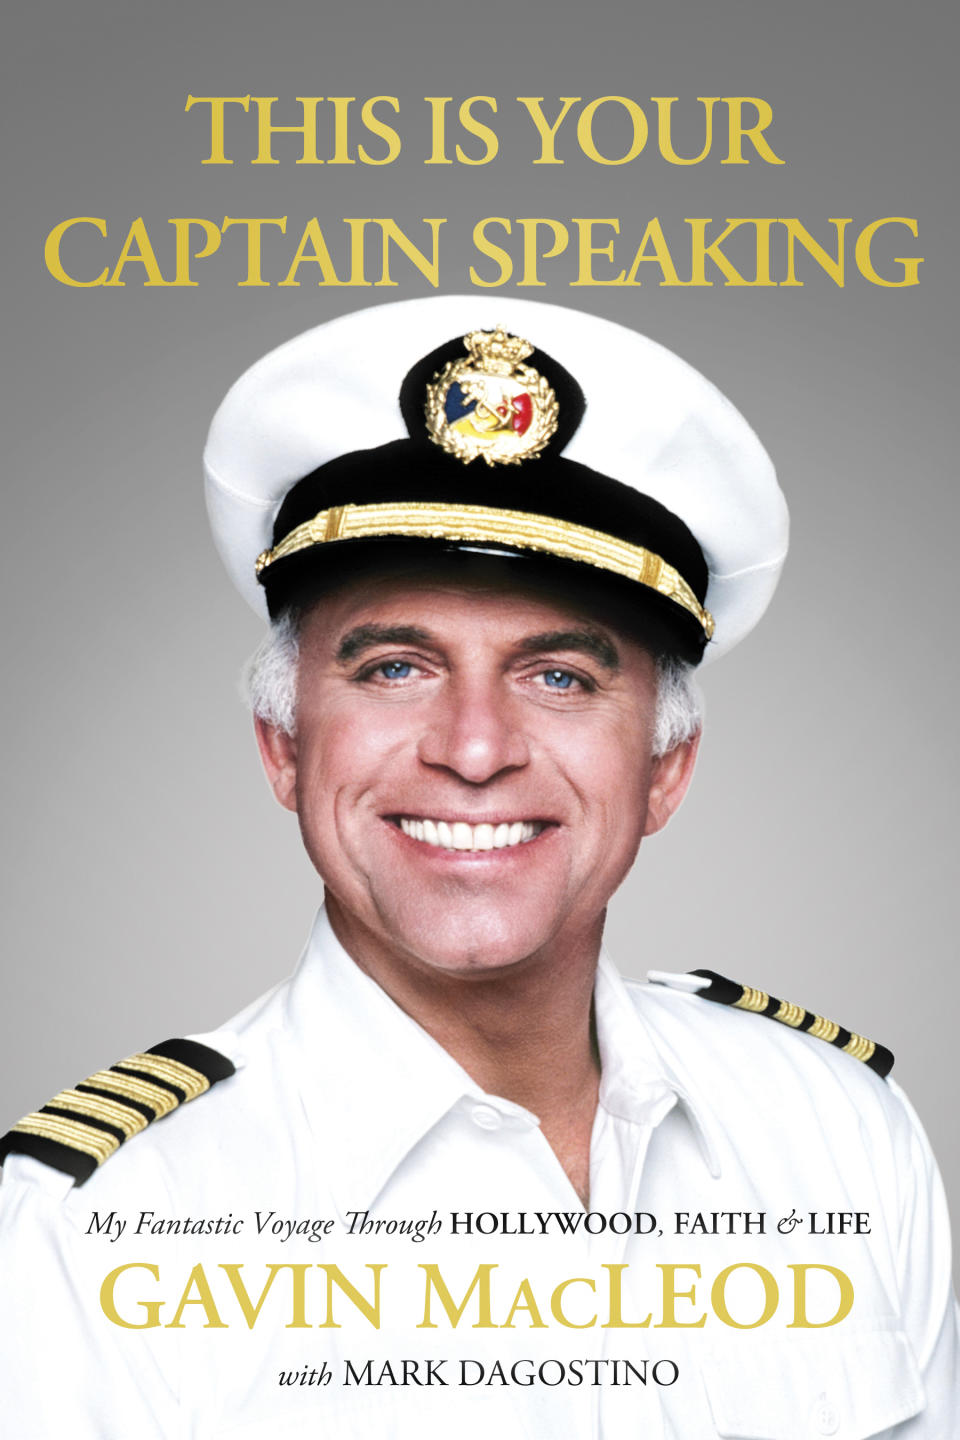 This photo released by W Publishing Group shows the cover of the book, "This is Your Captain Speaking." The 82-year-old actor, Gavin MacLeod's autobiography will be released on Tuesday, Oct. 22, 2013. (AP Photo/W Publishing Group)